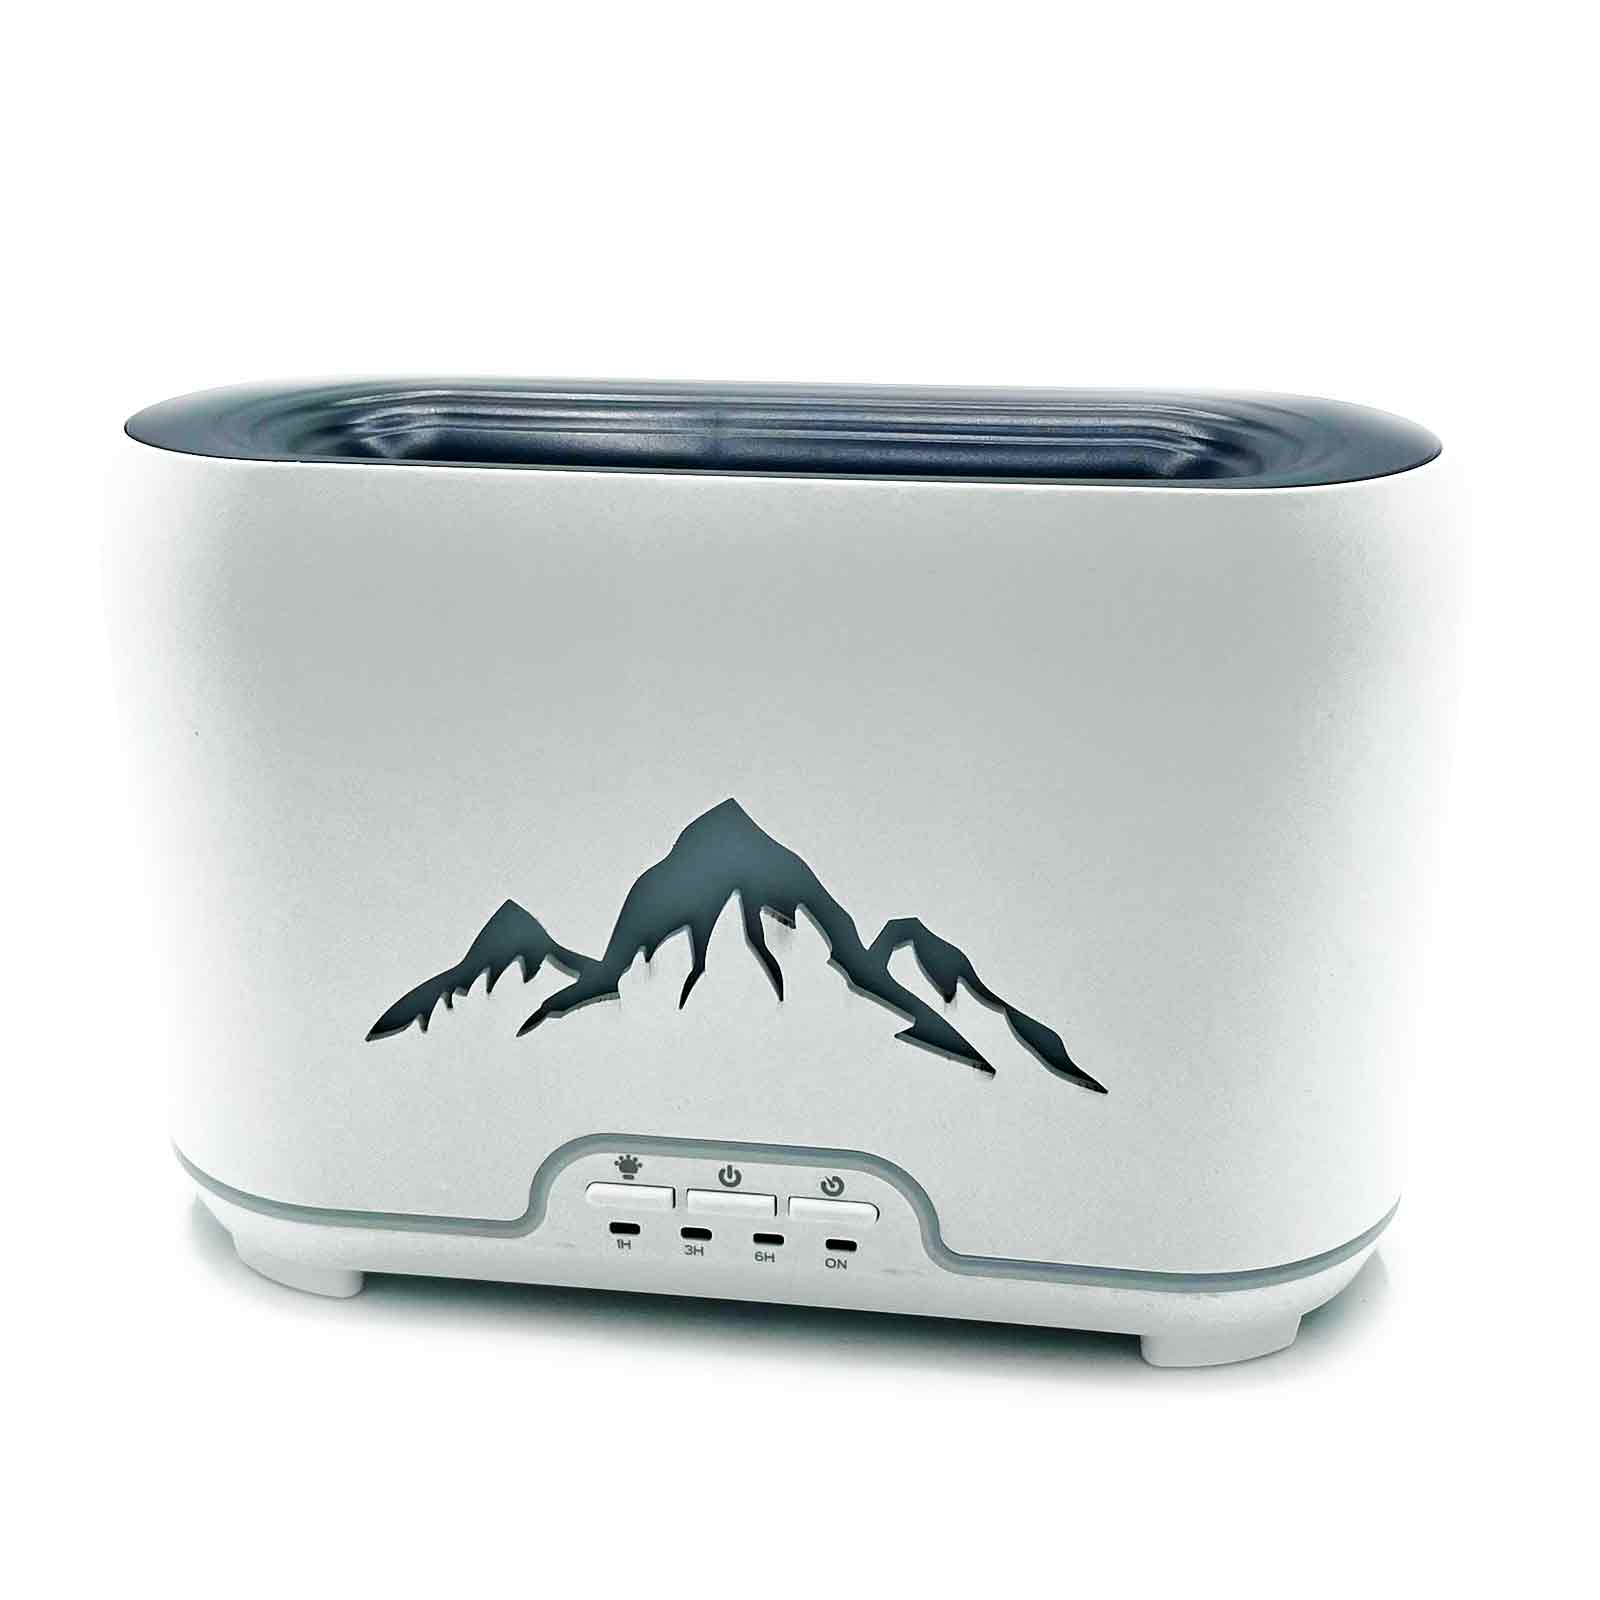 View Himalayas Aroma Diffuser USBC Remote control Flame Effect information